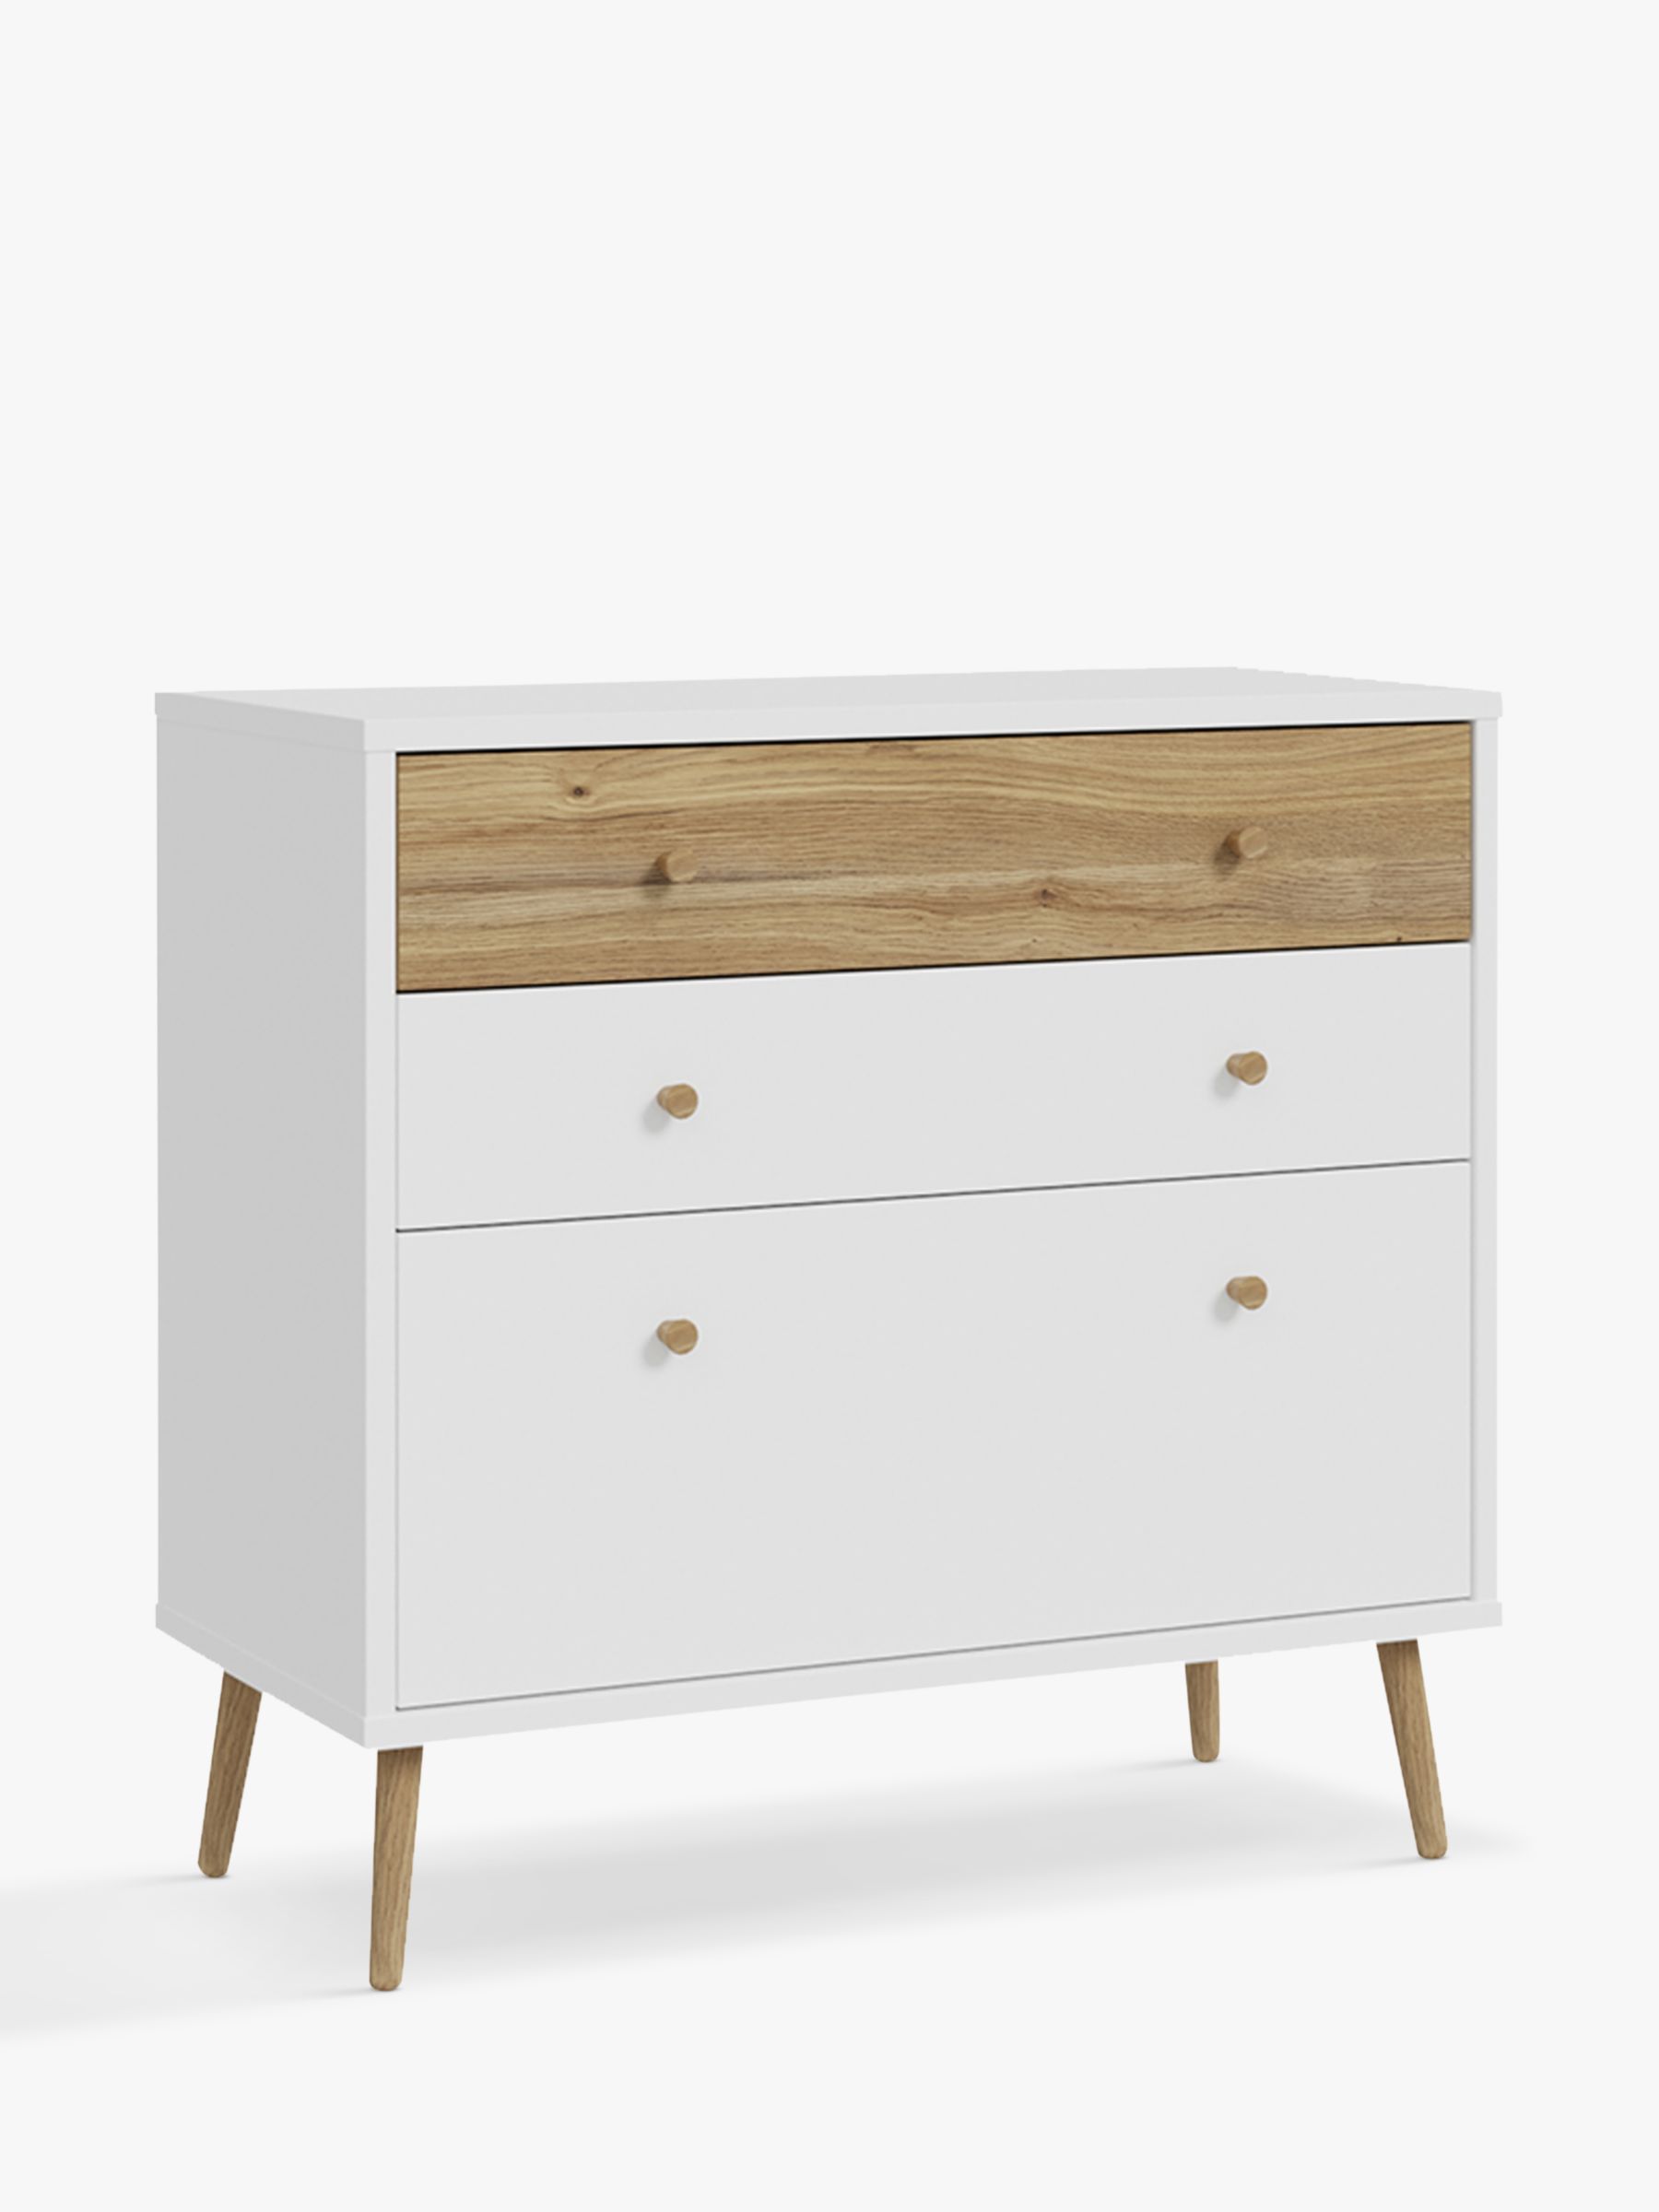 Chest, Chest with three drawers, the outside is decorated with